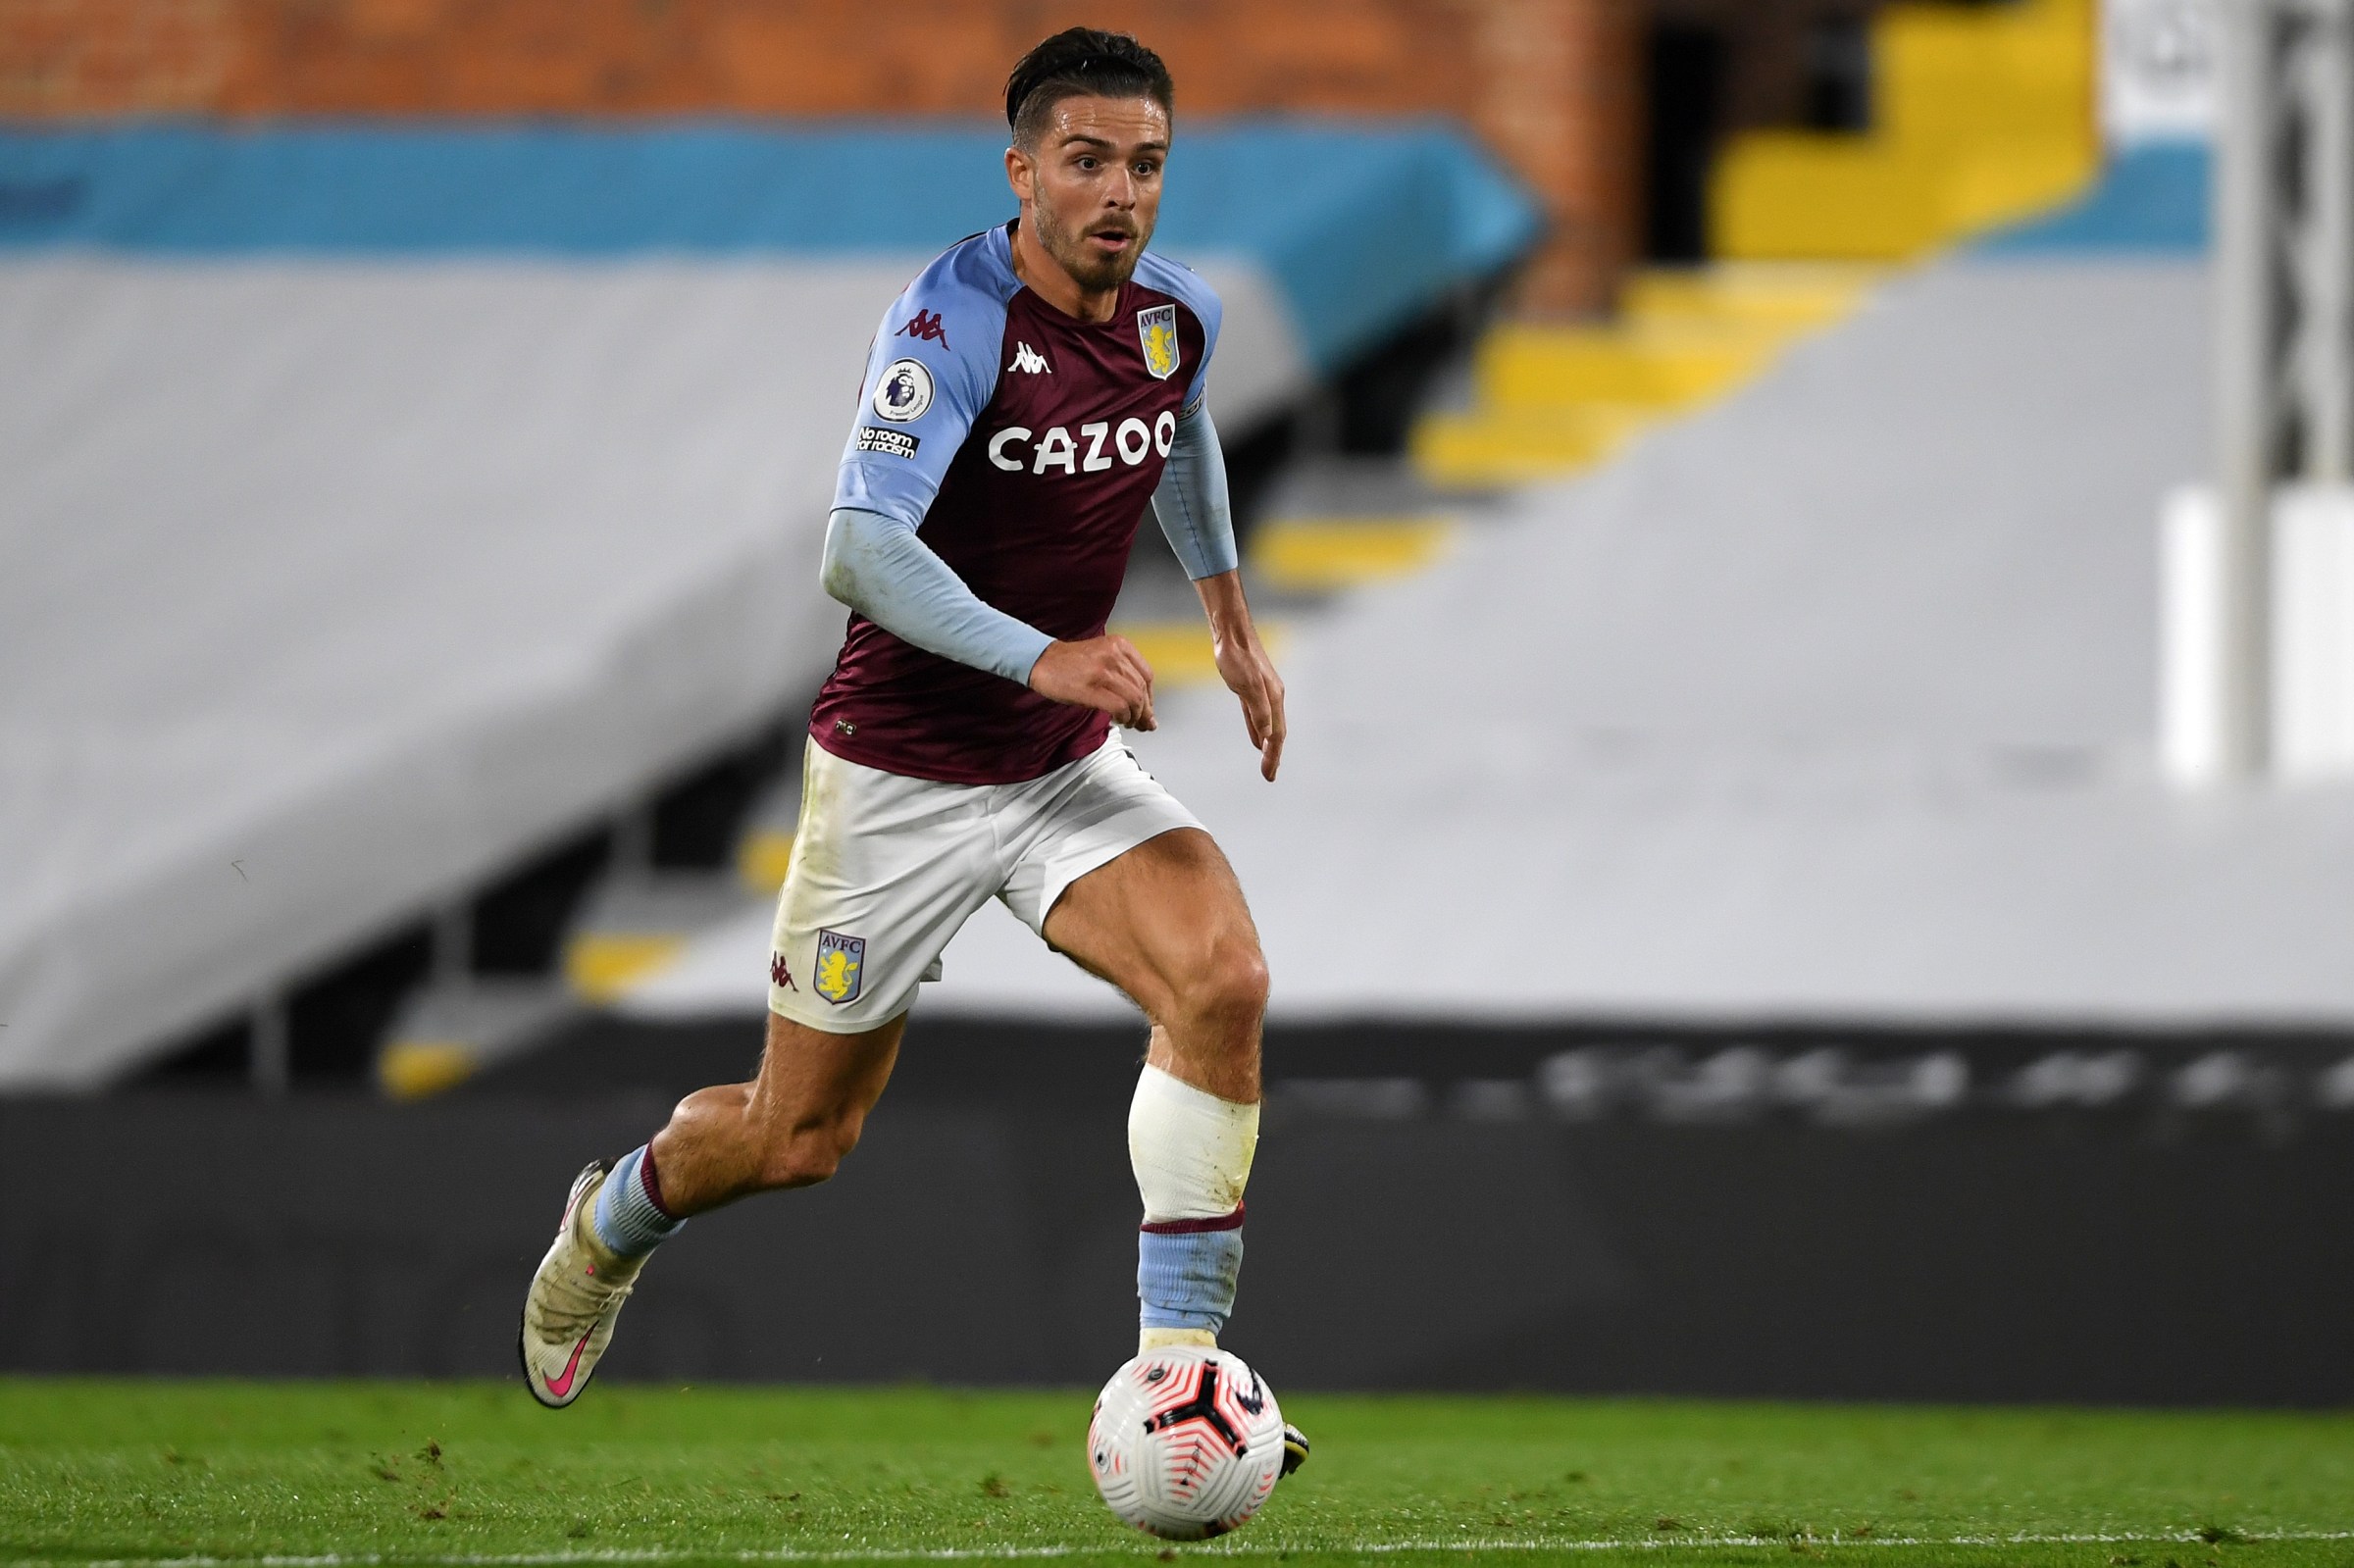 Aston Villa's English midfielder Jack Grealish runs with the ball during the English Premier League football match between Fulham and Aston Villa at Craven Cottage in London on September 28, 2020.